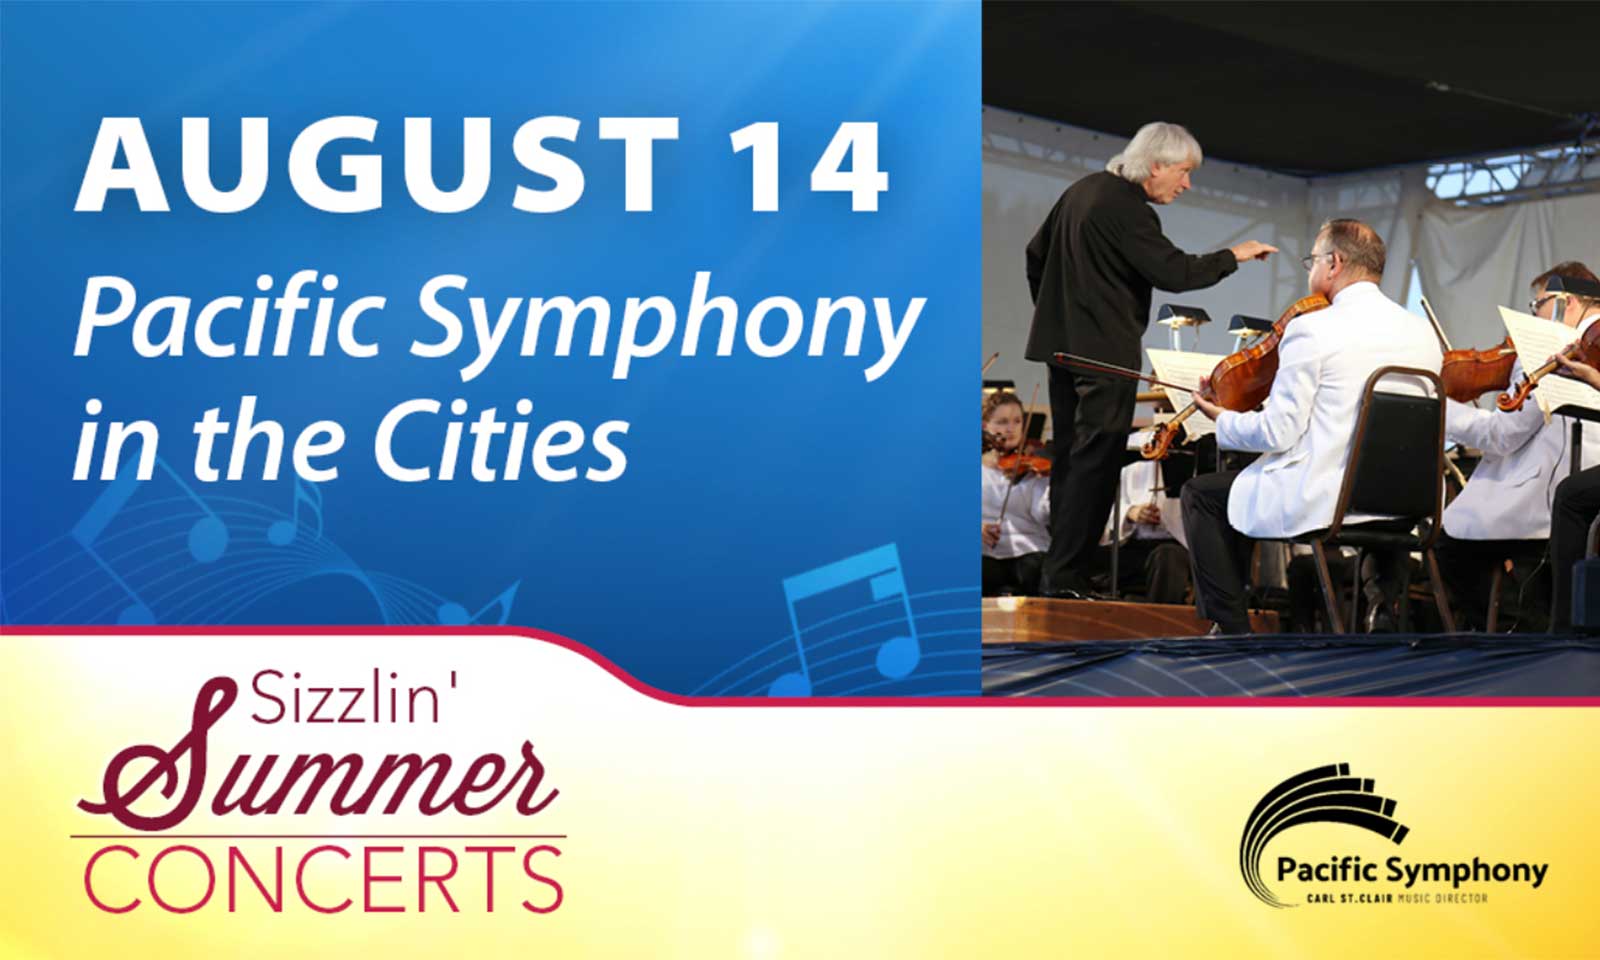 Sizzlin' Summer Concert Pacific Symphony in the Cities (Orchestra